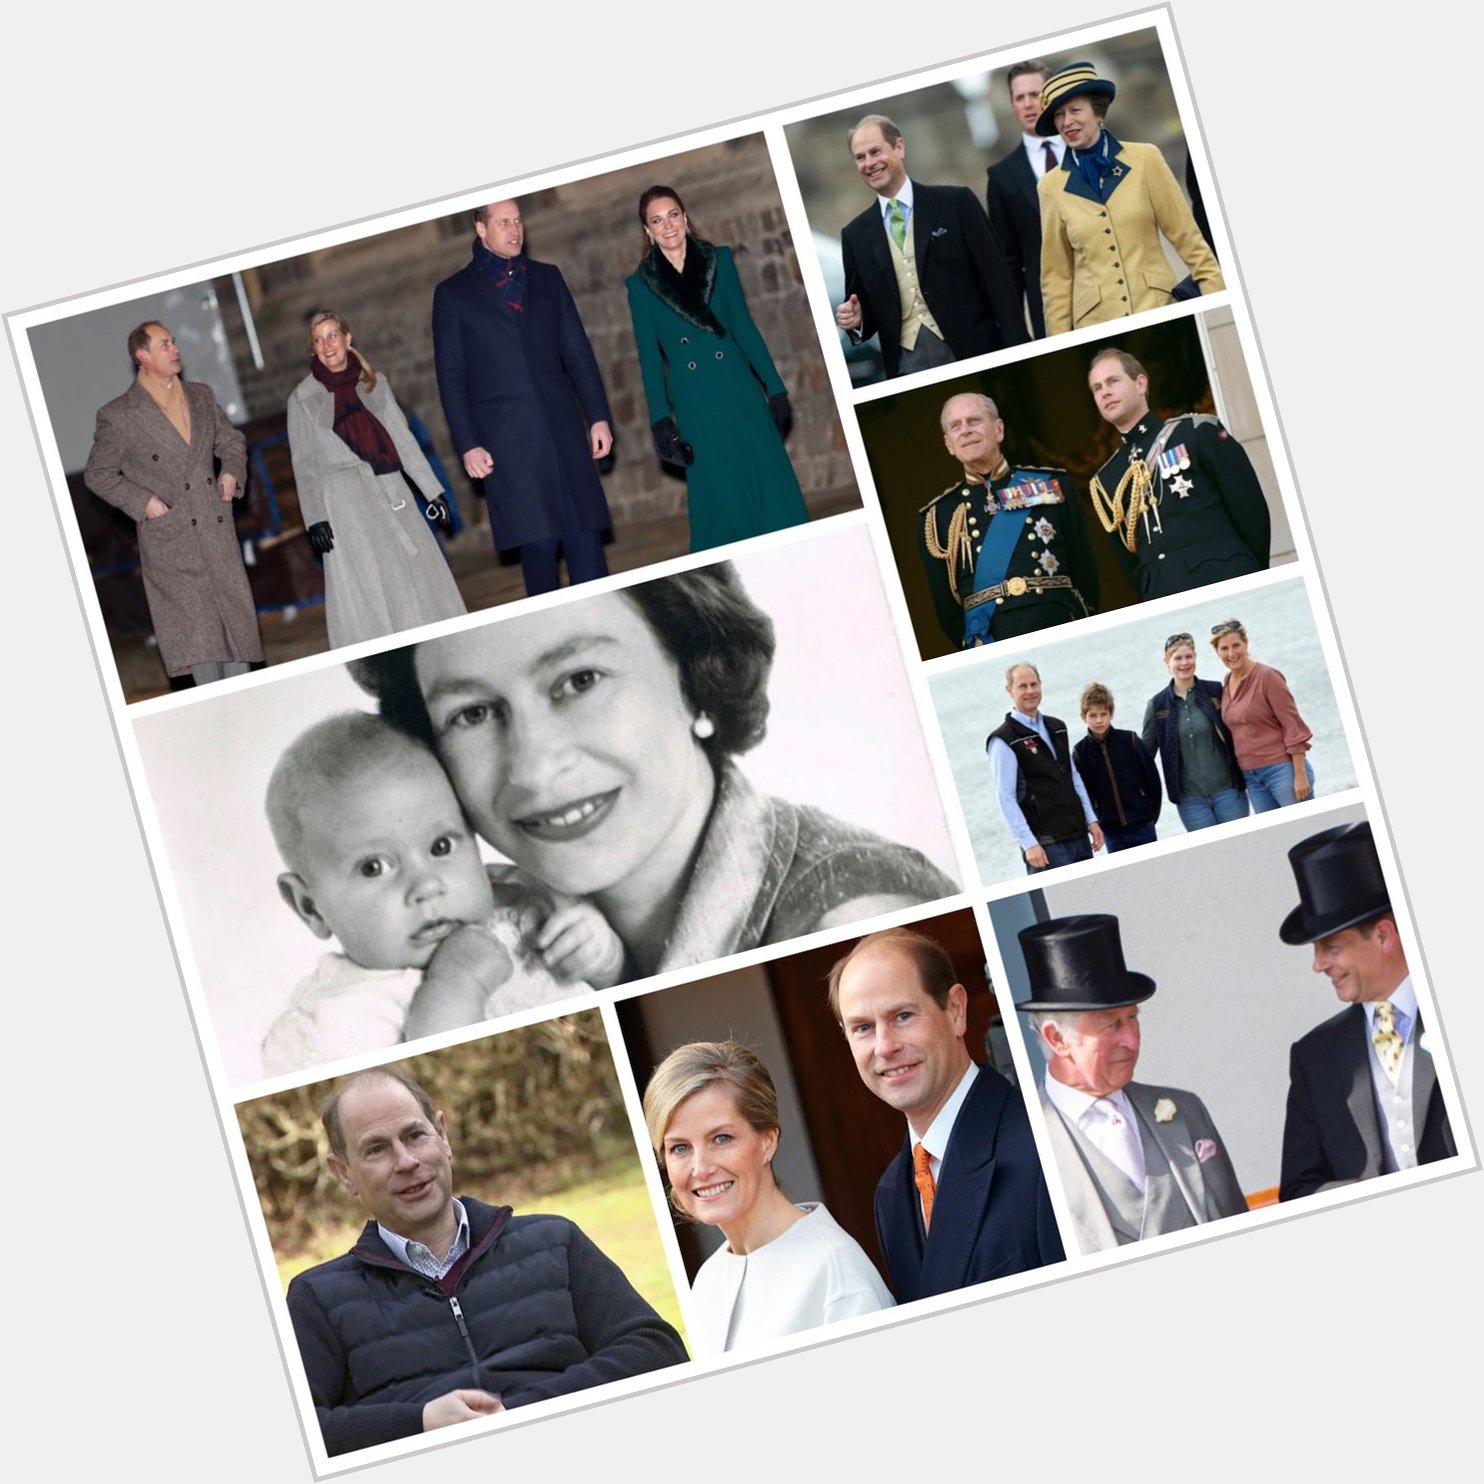 Wishing Prince Edward, the Earl of Wessex a very happy birthday! 